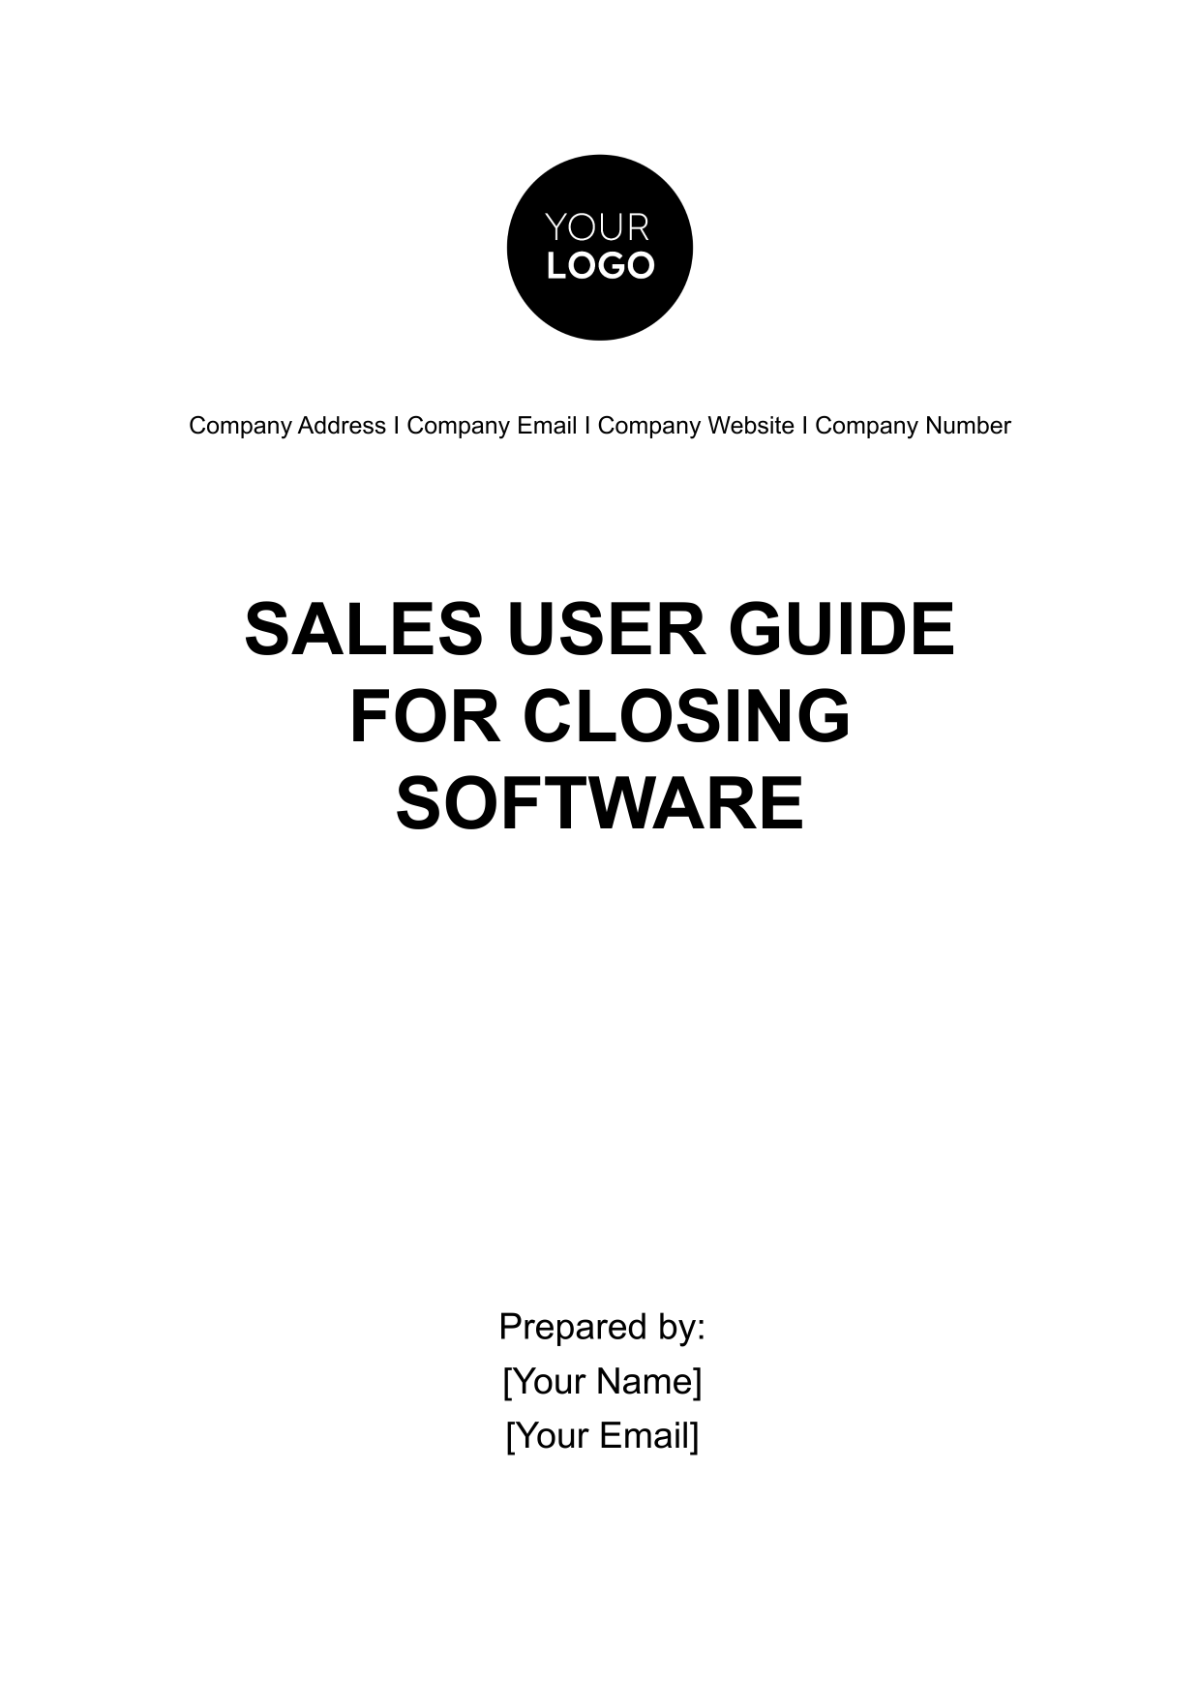 Sales User Guide for Closing Software Template